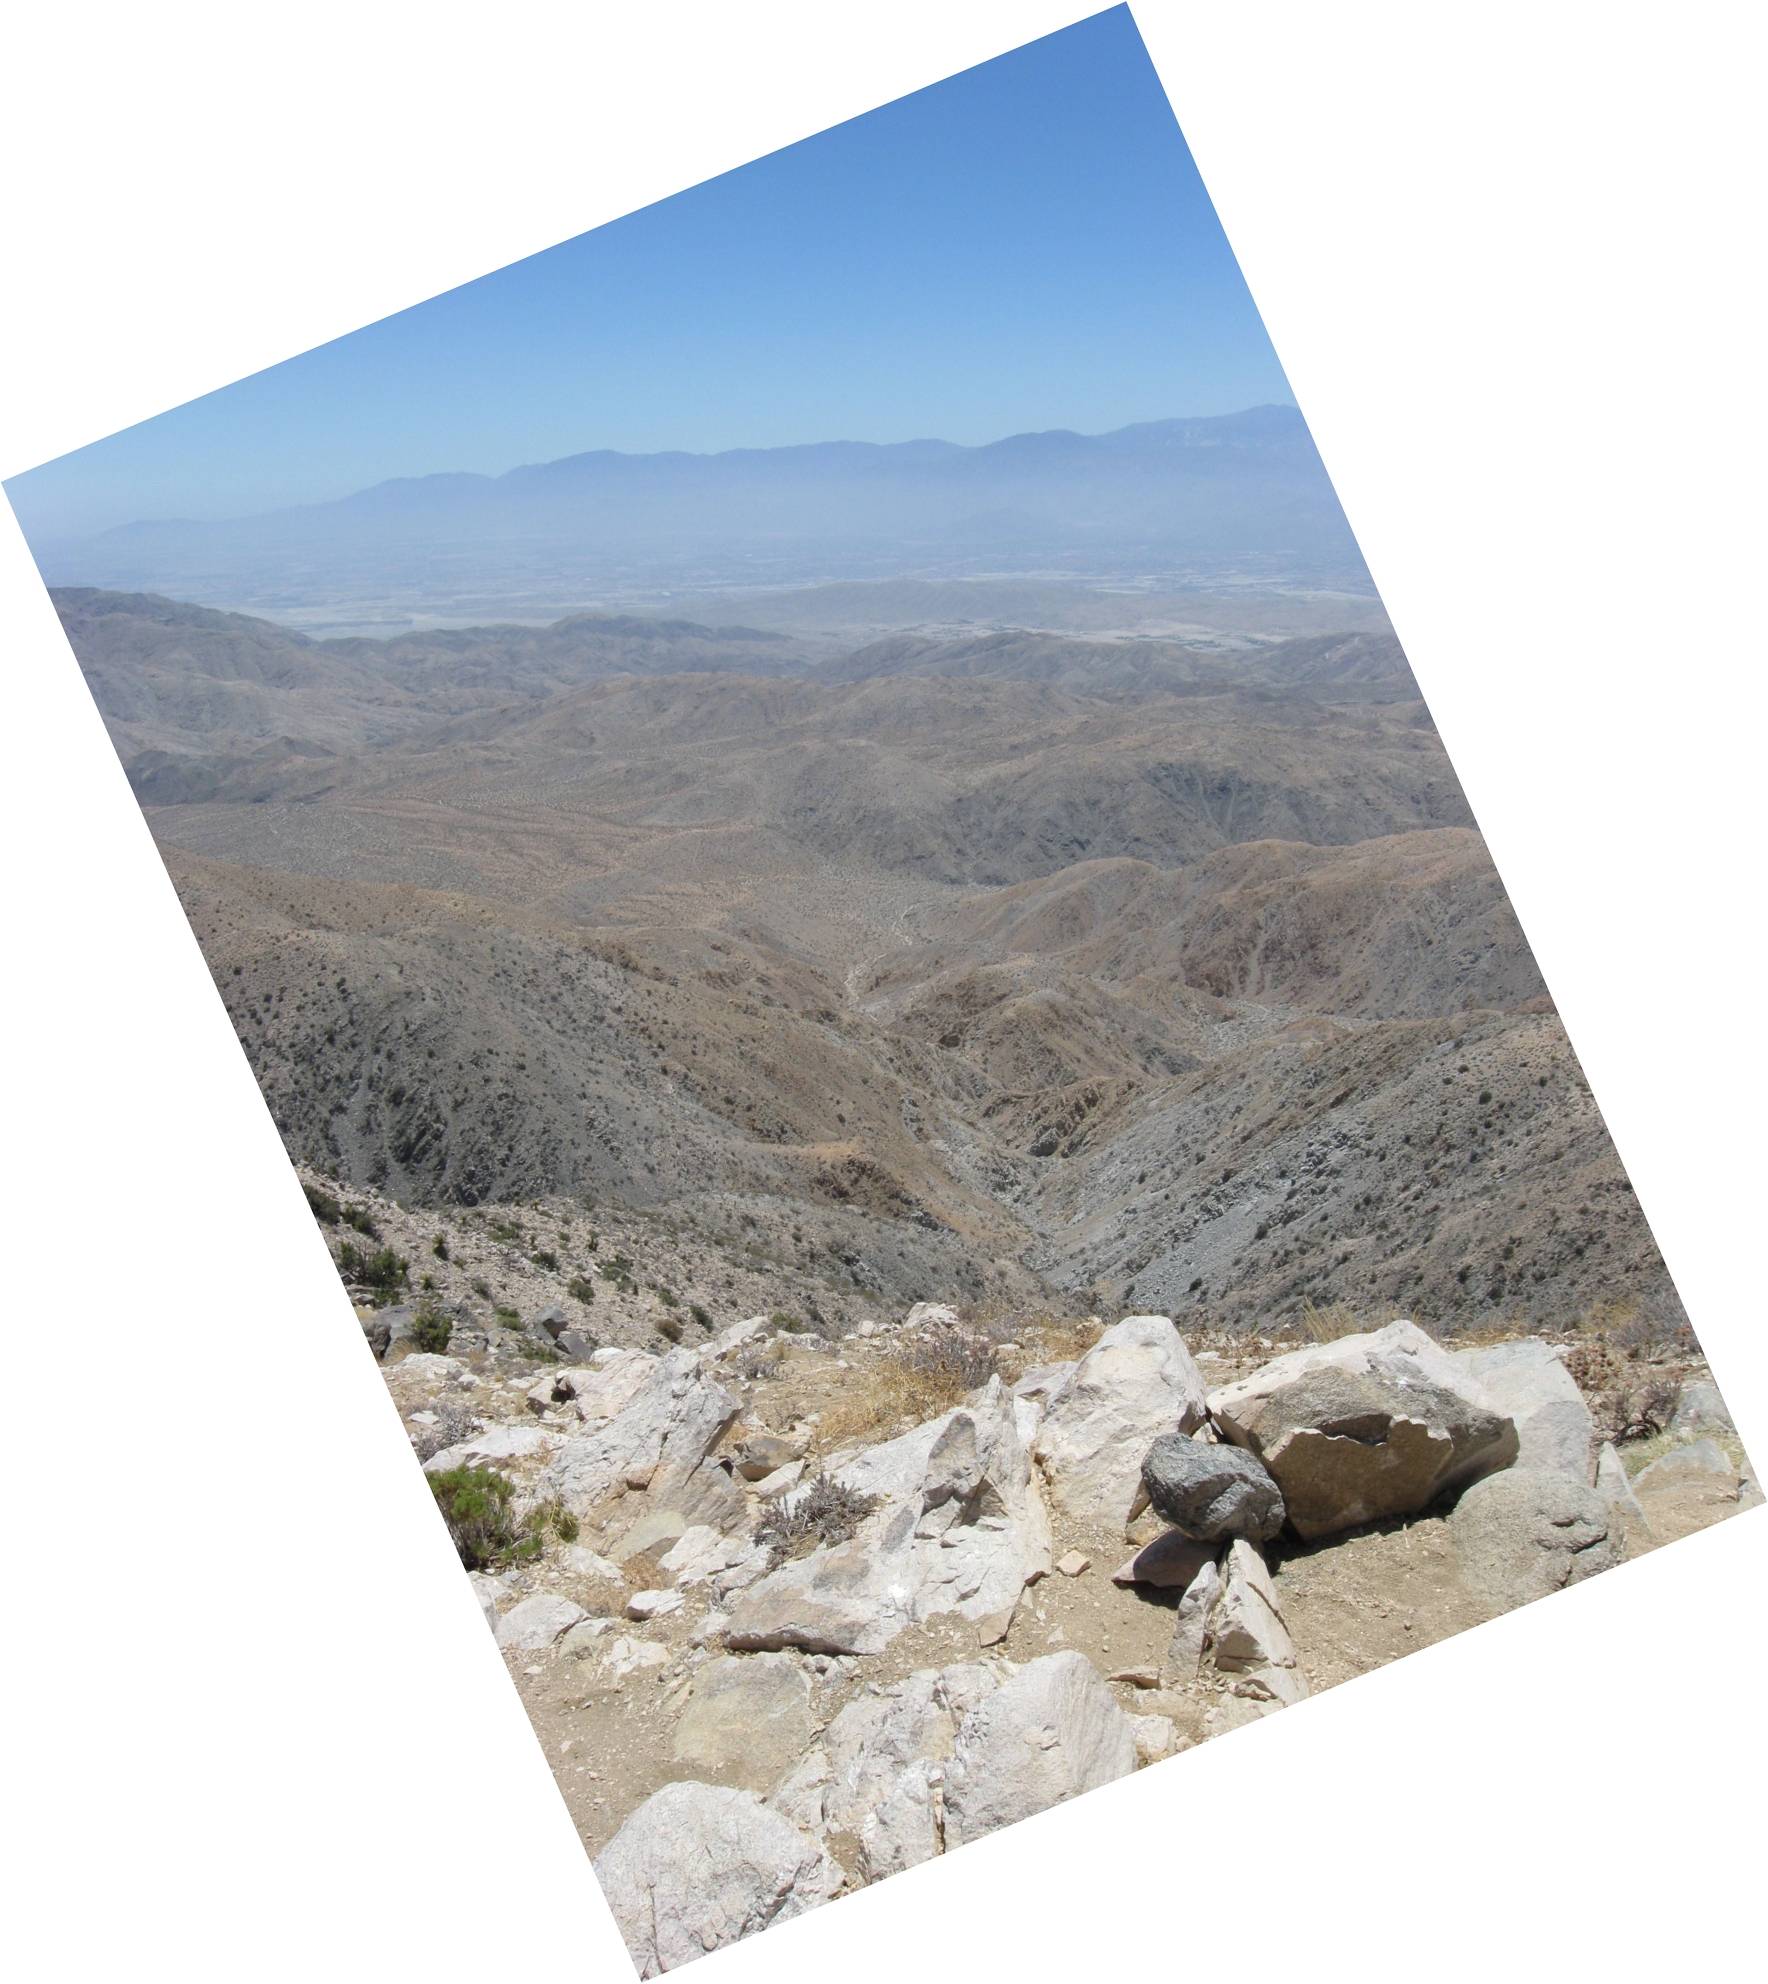 Image: A view from the Keys View (1581 m) observation point into the Coachella Valley below